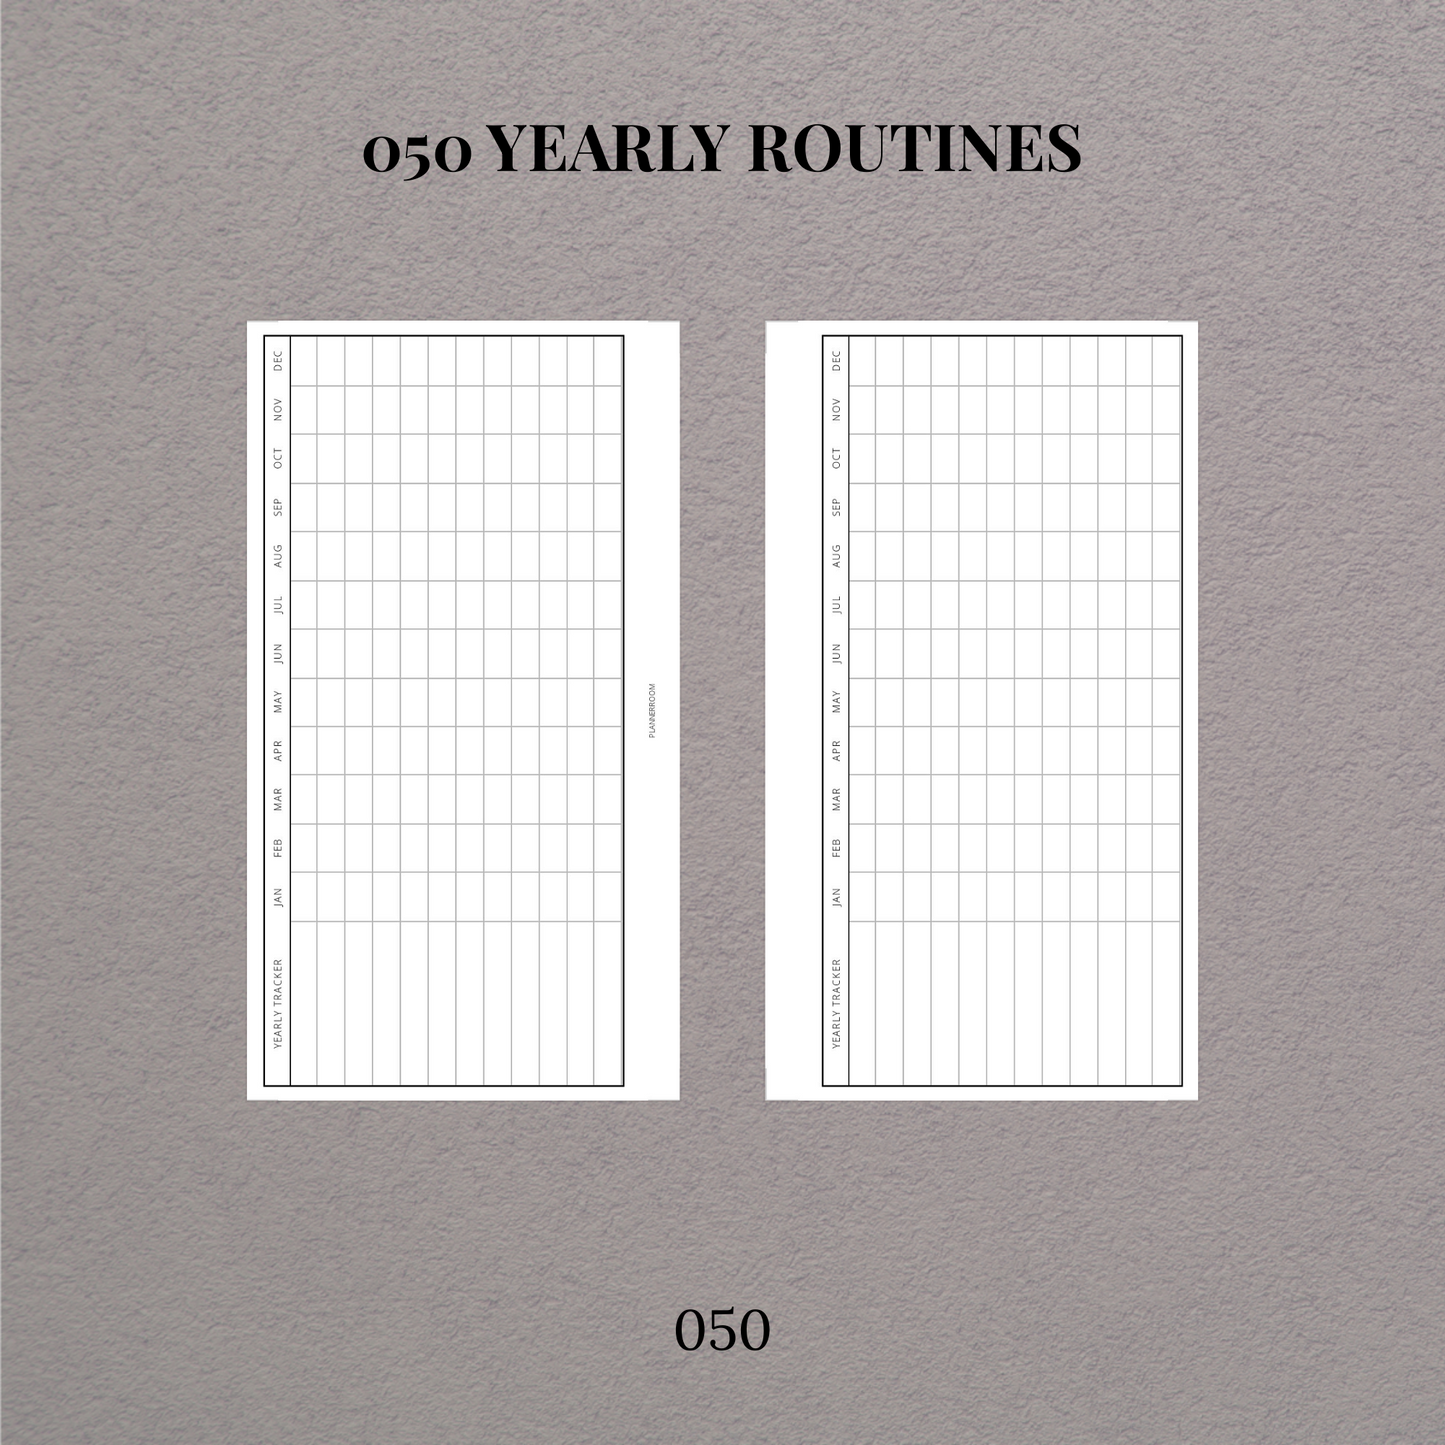 Yearly routines | Printable inserts - 050